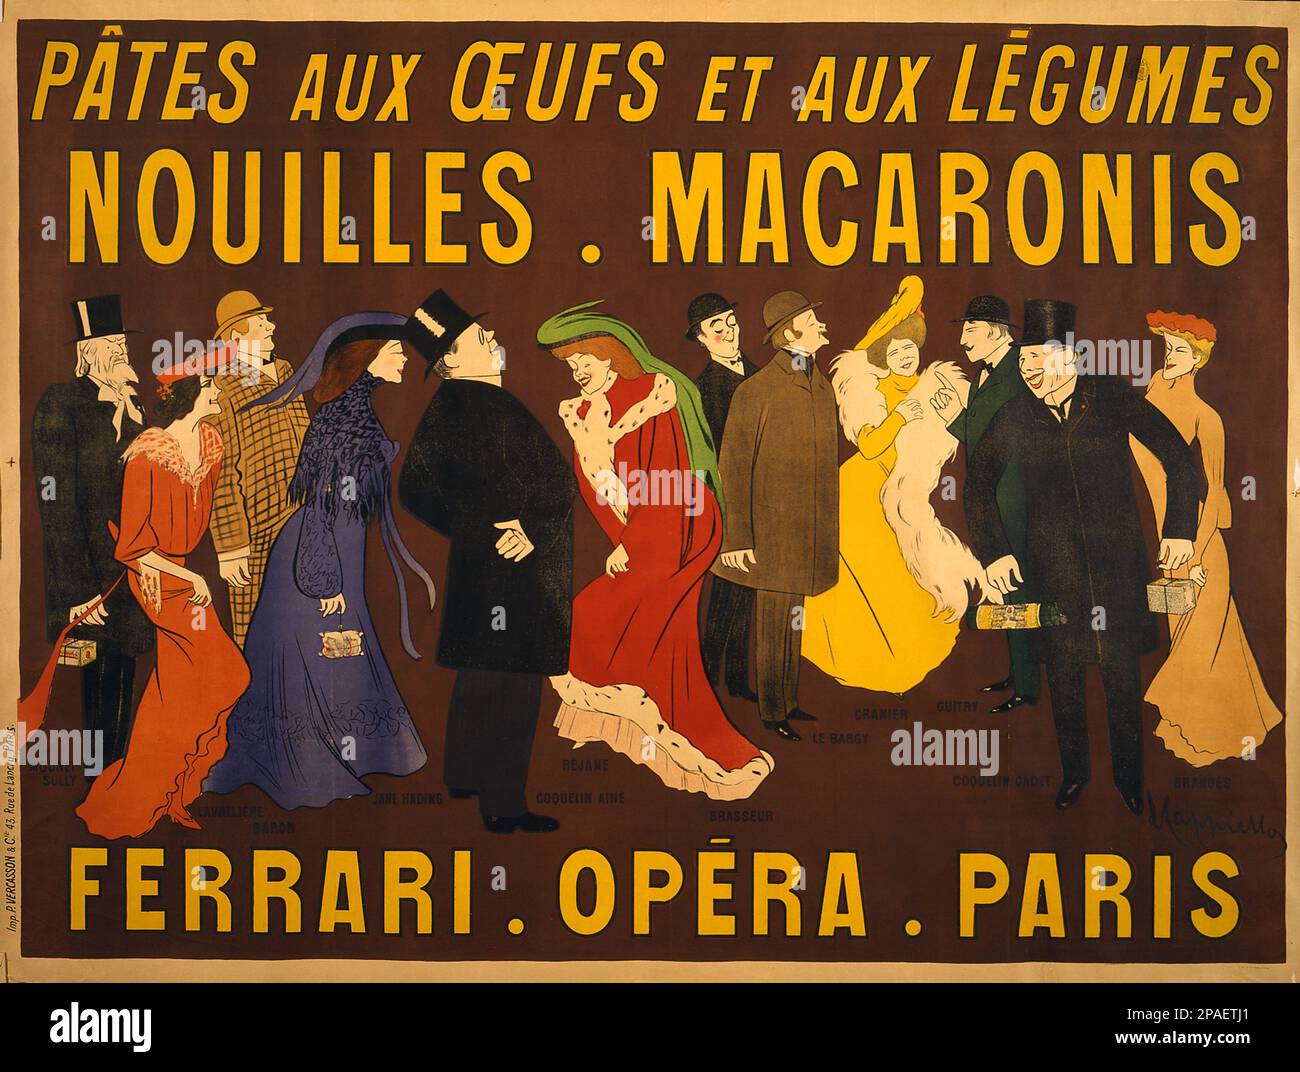 1901 , Paris , FRANCE  : The PATES AUX OEUFS ET AUX LEGUMES NOUILLES MACARONIS by FERRARI at OPERA in PARIS  , poster advertising by the celebrated illustrator painter  LEONETTO CAPPIELLO ( 1875 - 1942 )  for pasta and spaghetti factory in Paris . In this poster figure the portraits of most celebrated BELLE EPOQUES figures of THEATRE world : MOUNET-SULLY , Eva LA VALLIERE , BARON , JANE HADING , COQUELIN AINE' , REJANE , BRASSEUR , LE GARCY , JEANNE GRANIER , SACHA GUITRY , COQUELIN CADET and BRANDES - FOTO STORICHE - HISTORY - ARTS - ARTE - PITTURA  - PITTORE - artist - artista - portrait - r Stock Photo